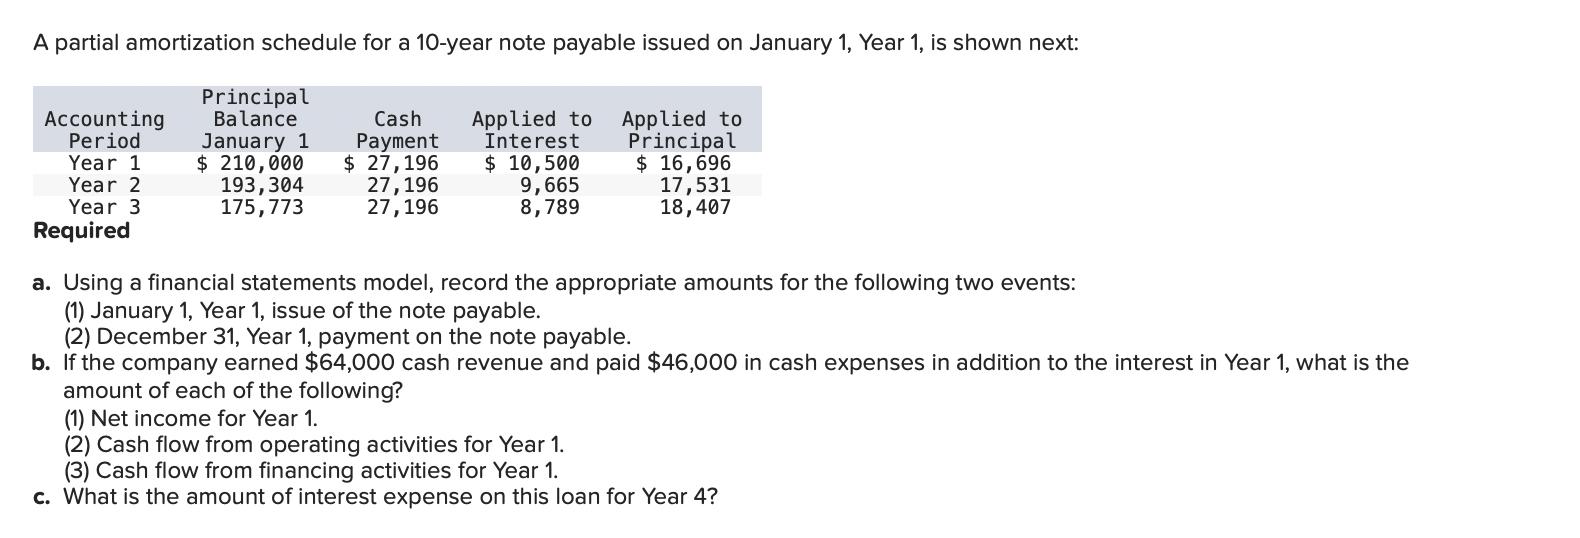 A partial amortization schedule for a 10-year note payable issued on January 1, Year 1, is shown next: